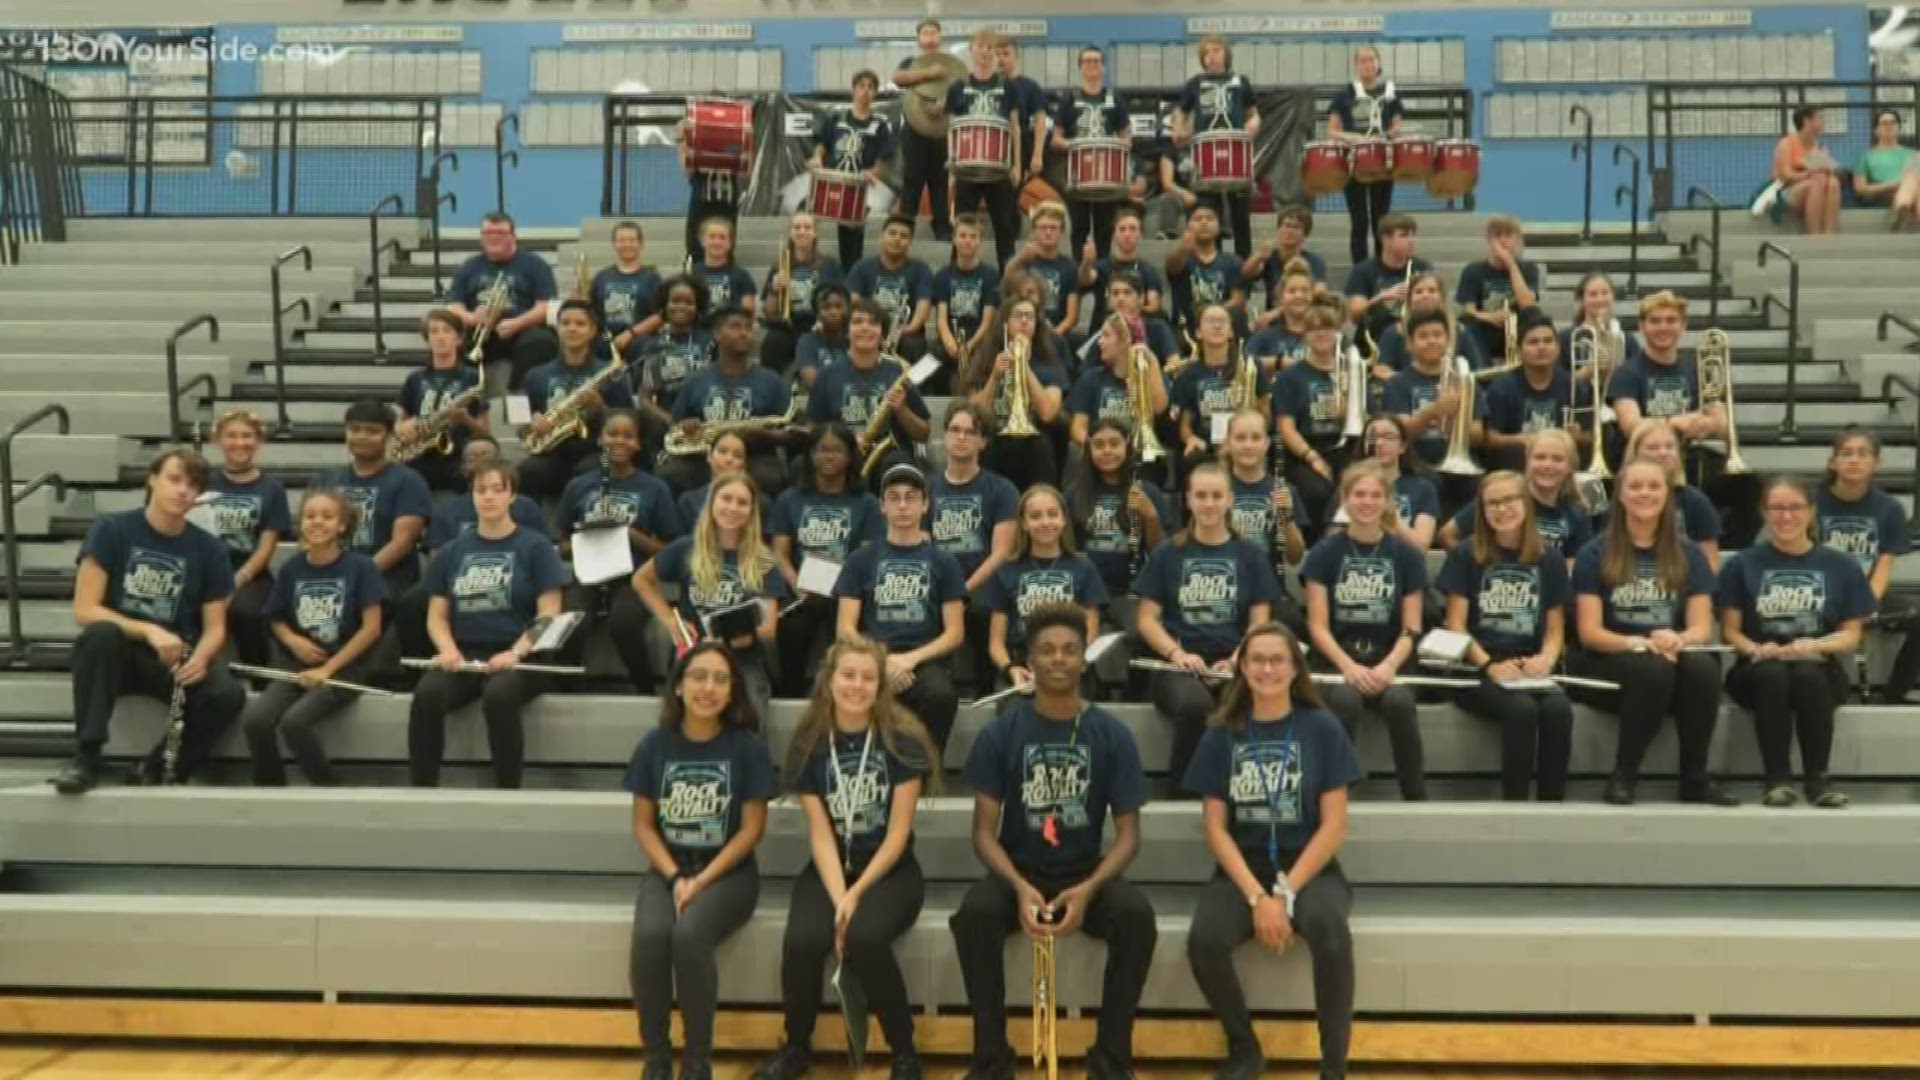 A local high school band is going to be playing on a very big stage next year.